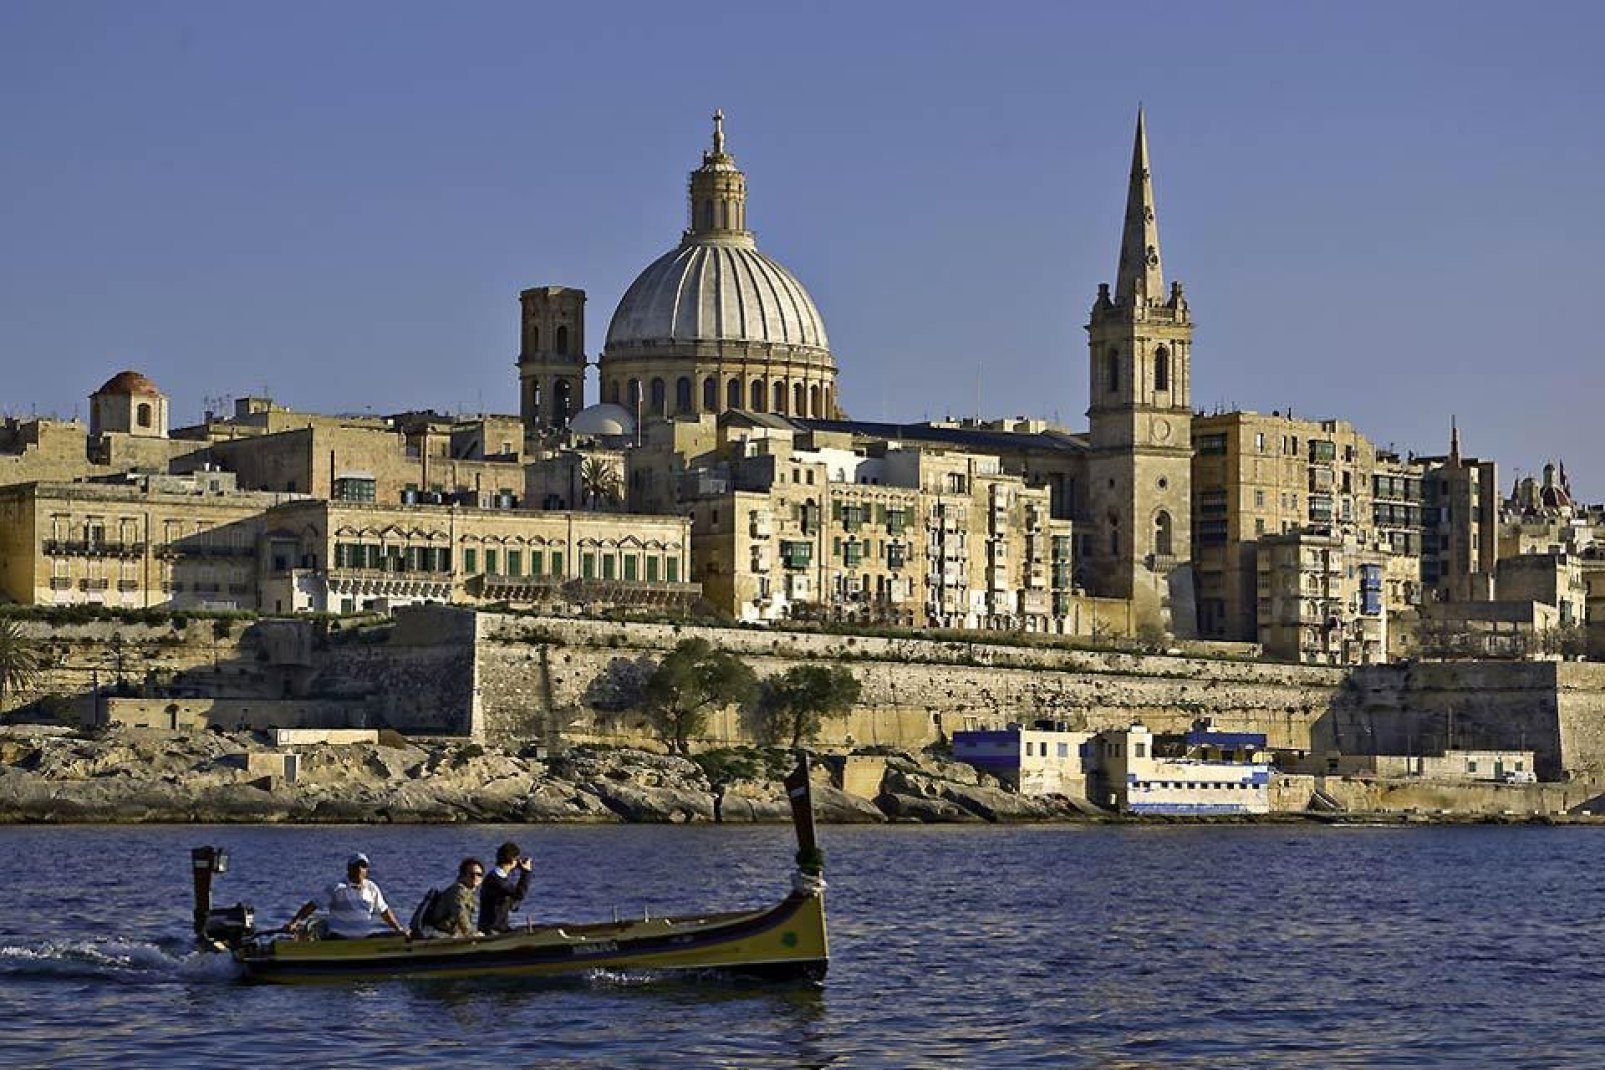 Valletta was built by the Knights Hospitaller, and is a masterpiece of baroque architecture.